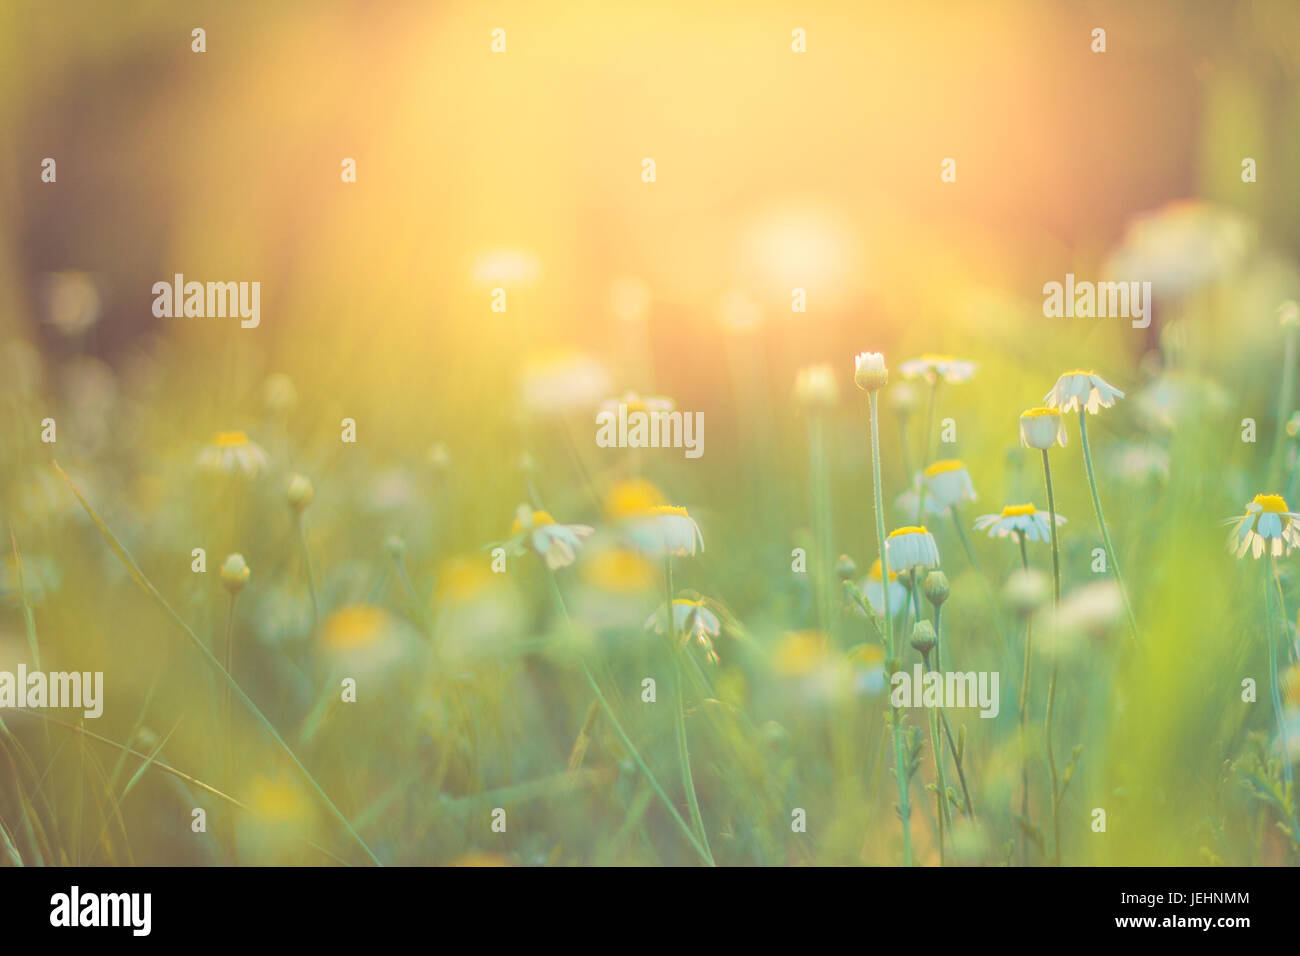 Abstract nature natural backgrounds with beauty bokeh. Golden sunlight sunny summer flowers nature background soft zen relaxing mood inspirational Stock Photo